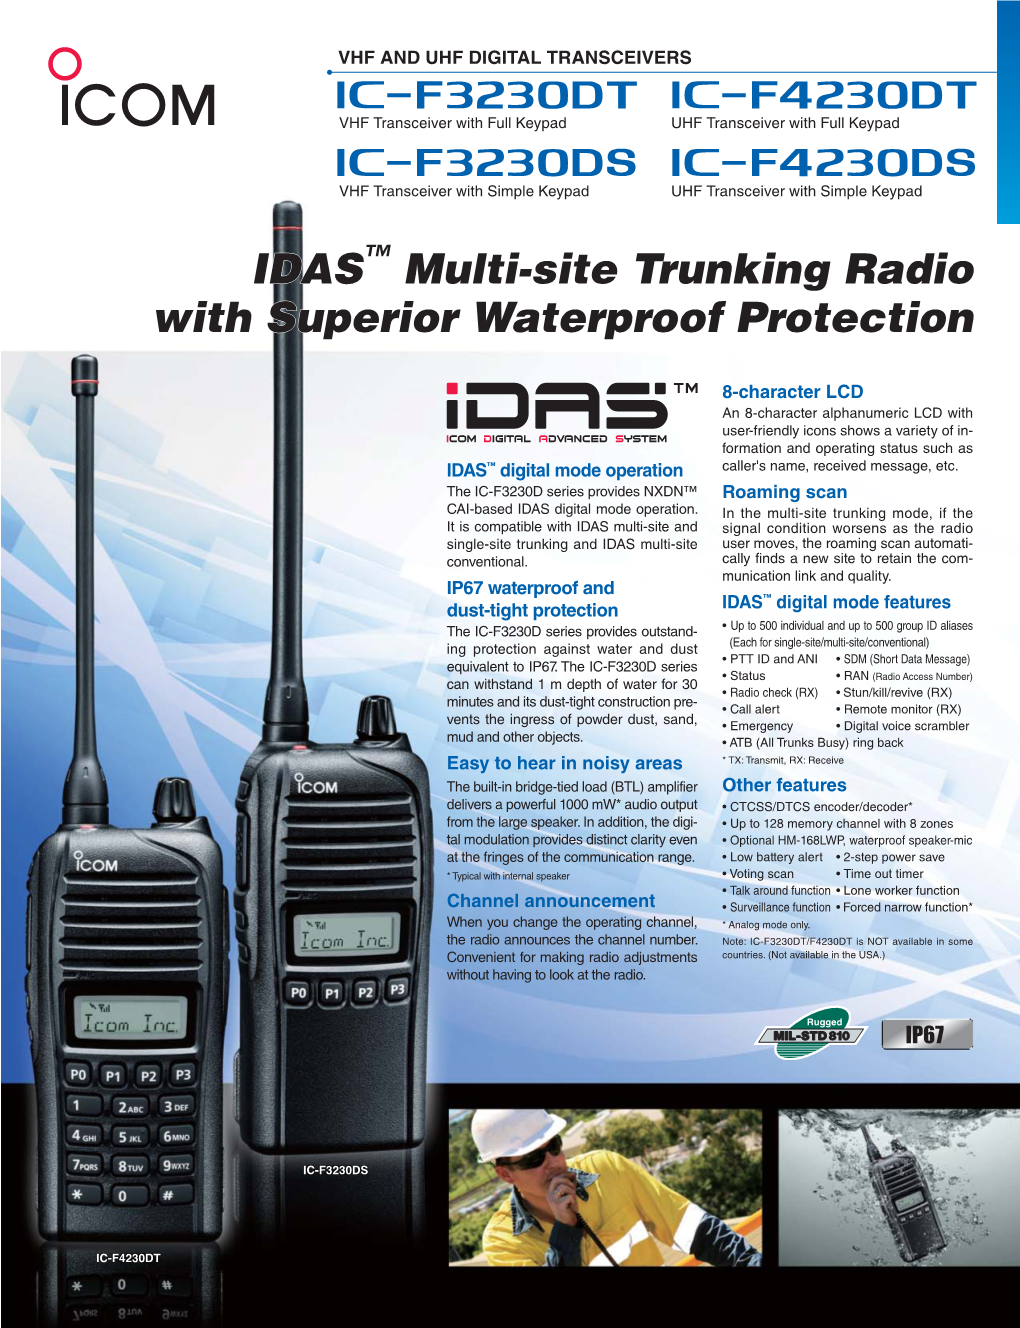 IDAS Multi-Site Trunking Radio with Superior Waterproof Protection